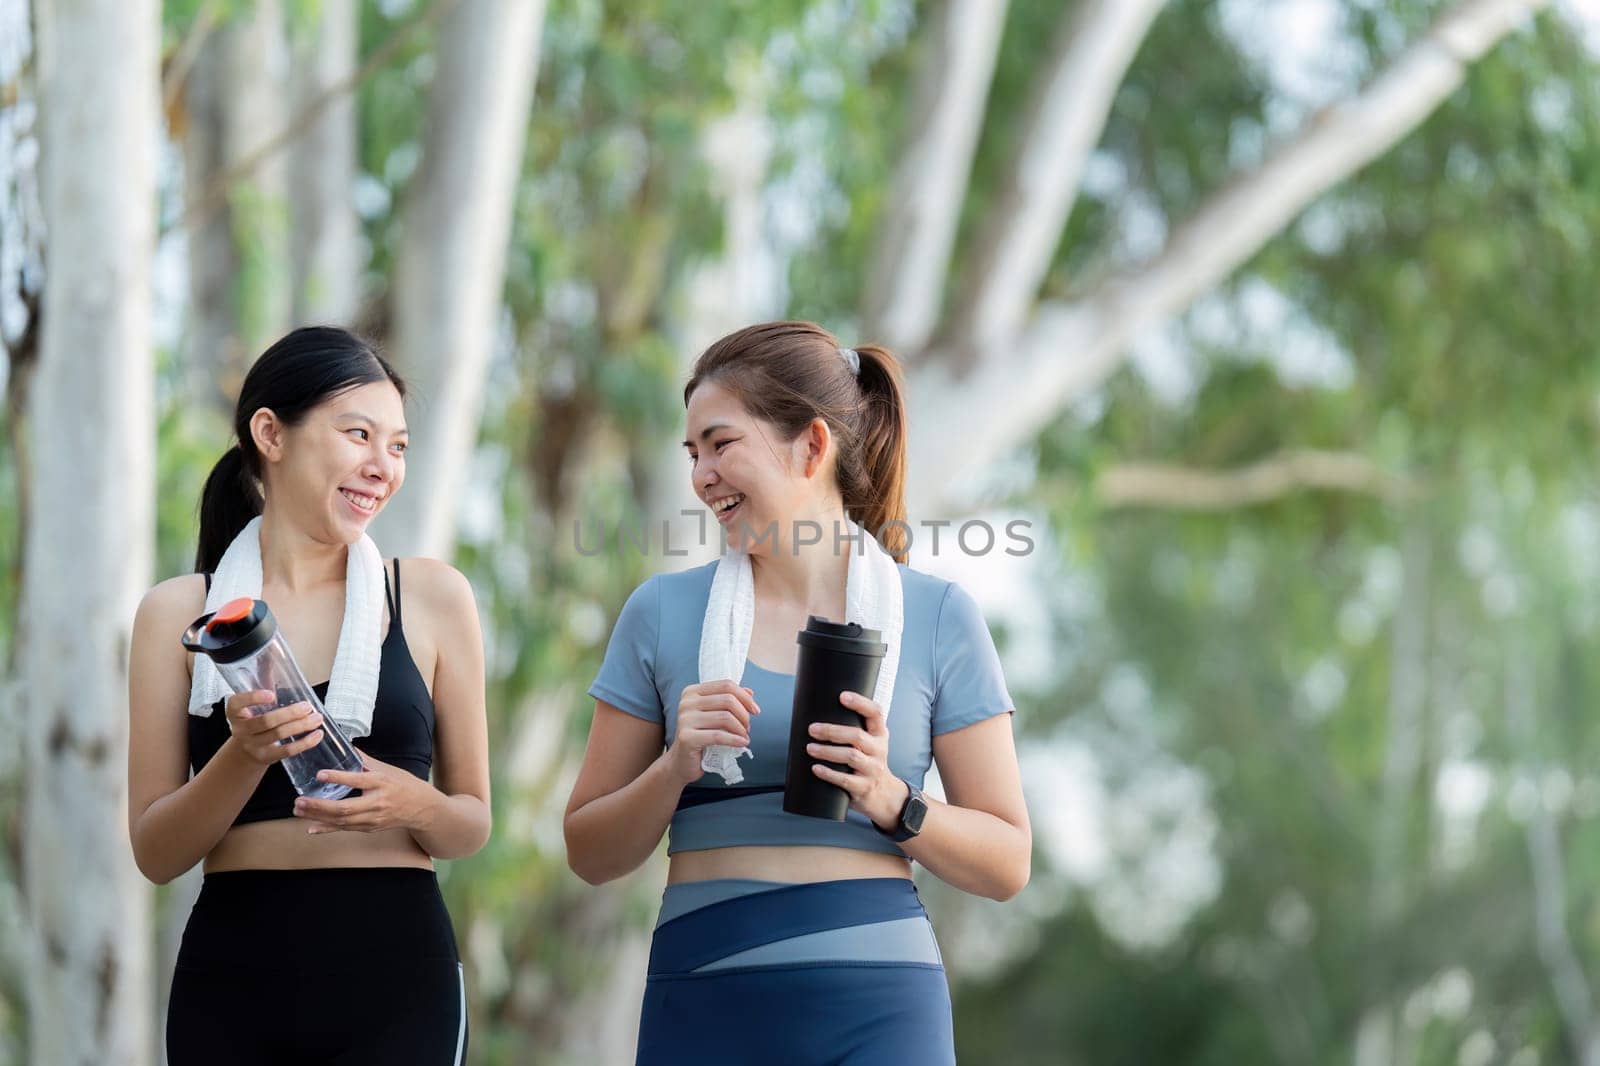 Two friends share a joyful moment while running in the morning, staying hydrated and enjoying the fresh air in a beautiful outdoor environment.